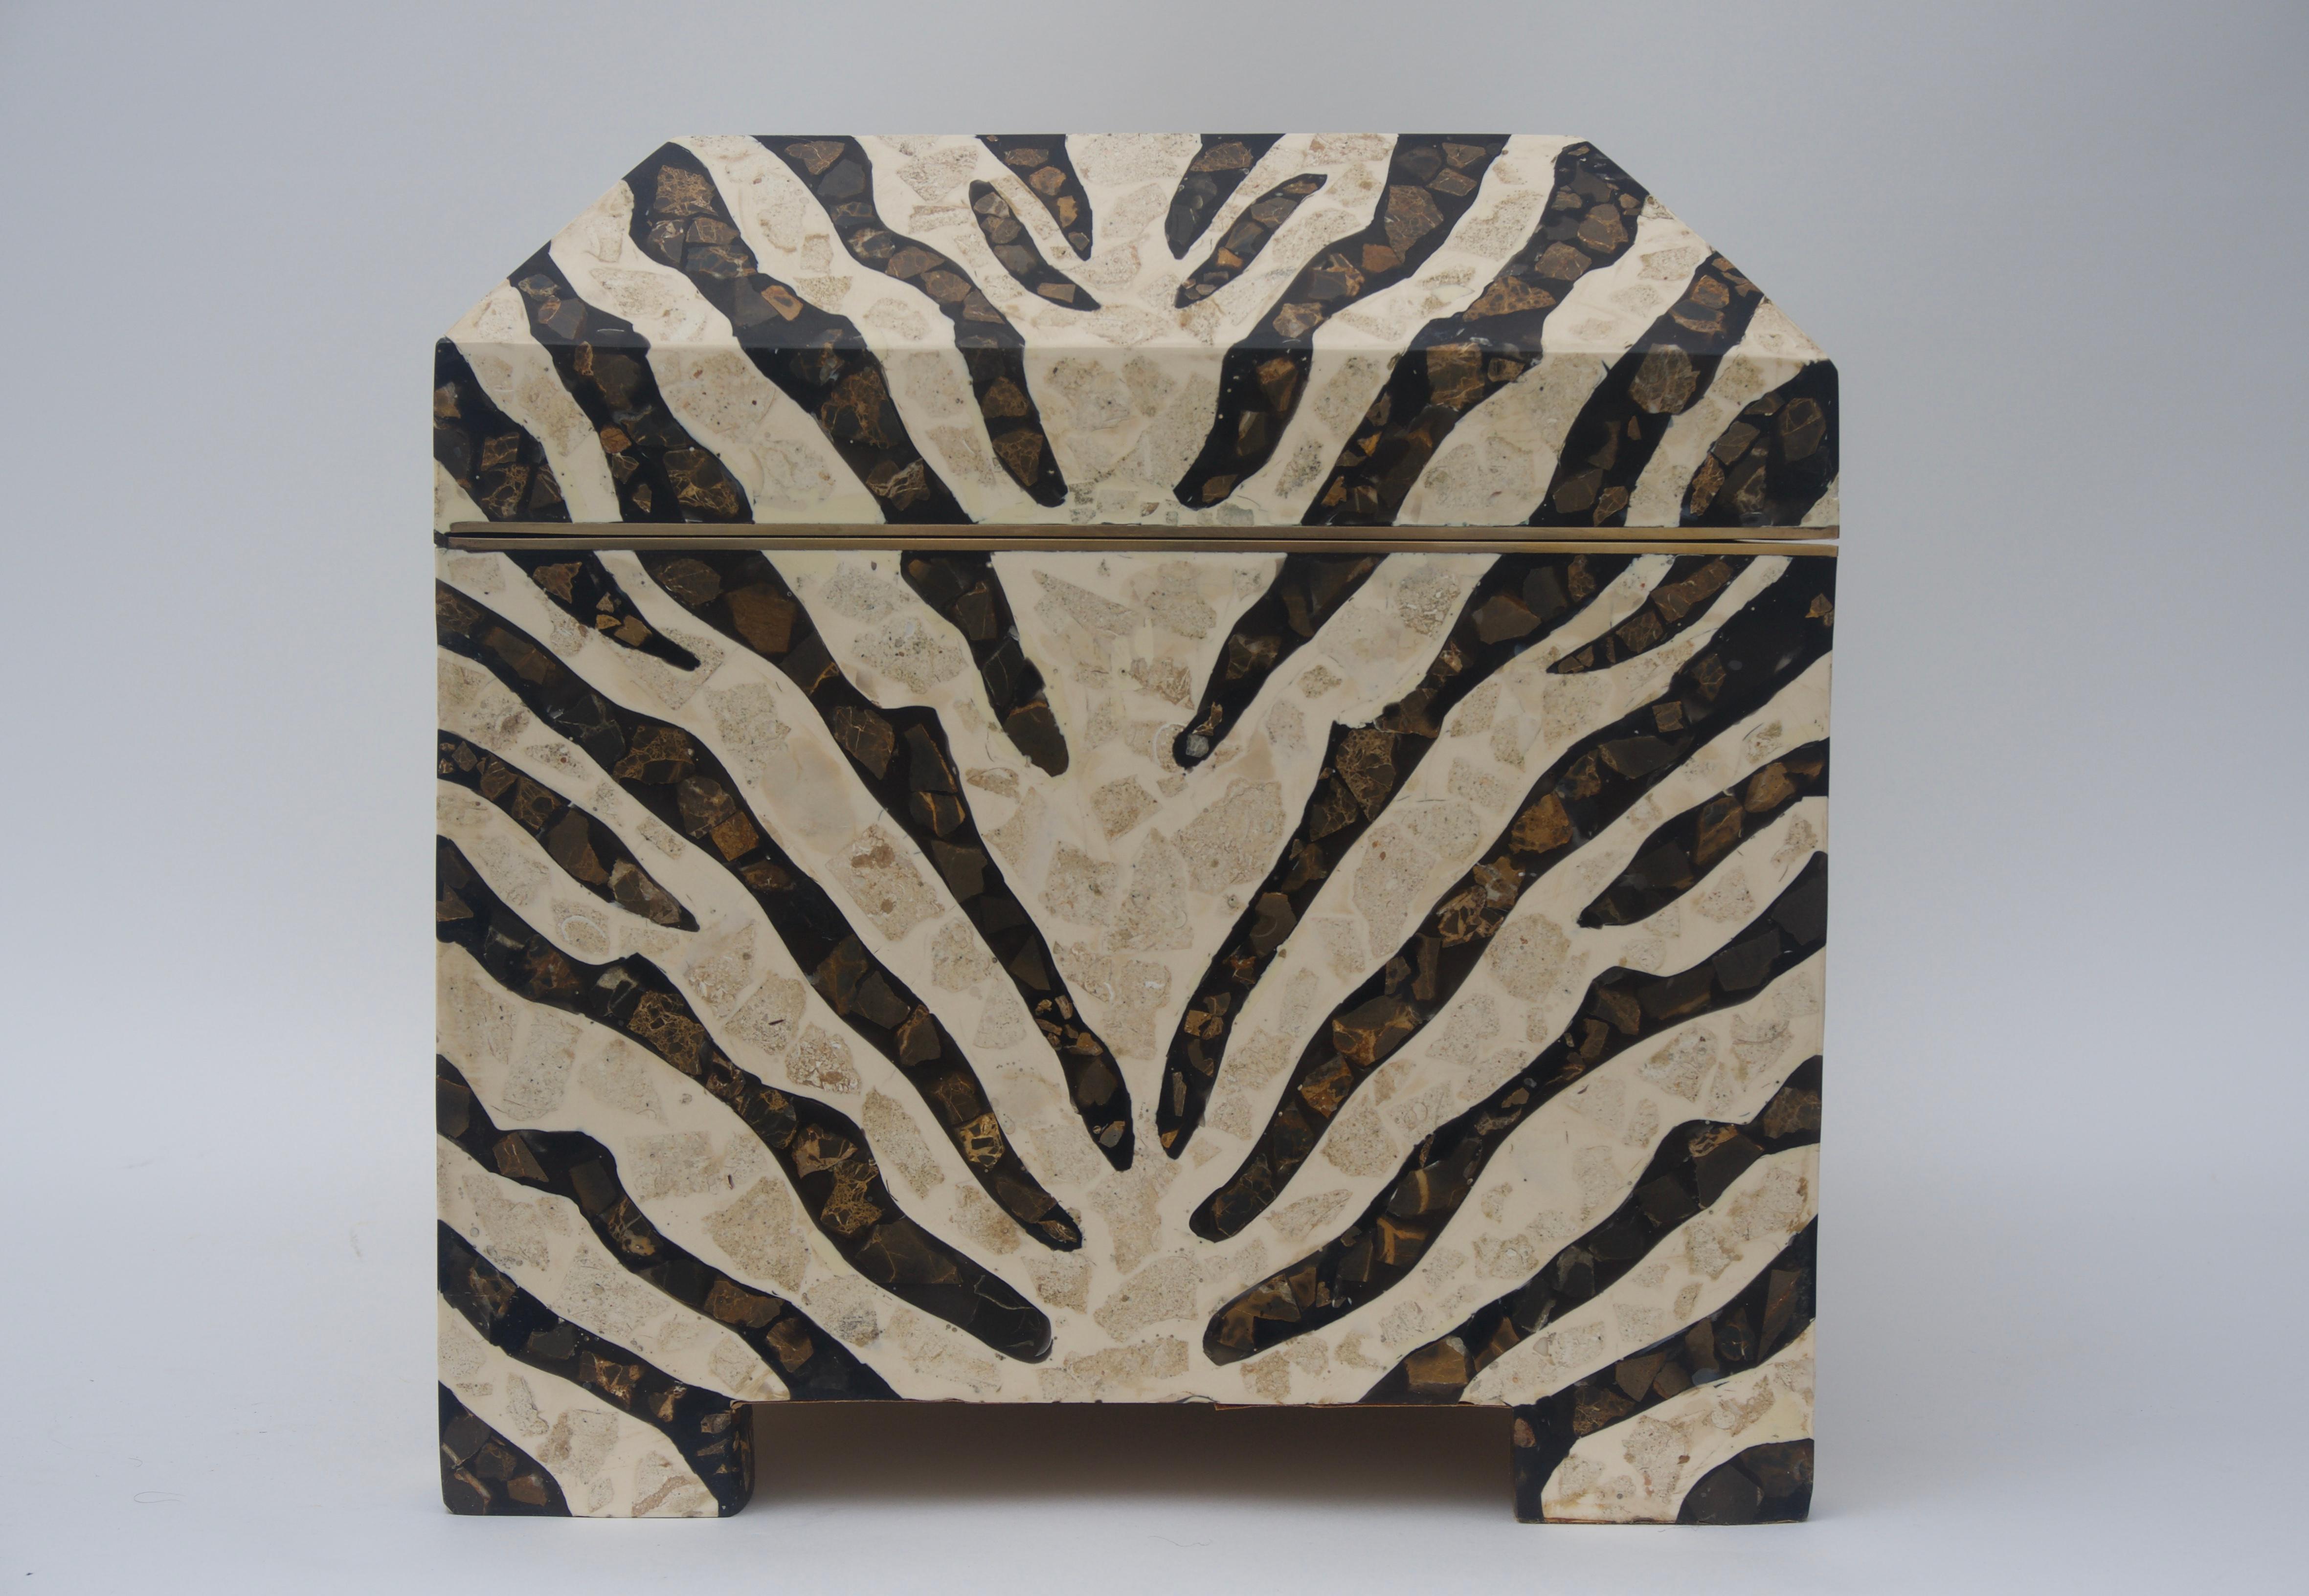 This large scale stylish piece is dates to the 1980s and was created by Maitland Smith. The zebra stripe motif is fabricated in marble veneers, polished brass and the interior has a beige faux suede lining.